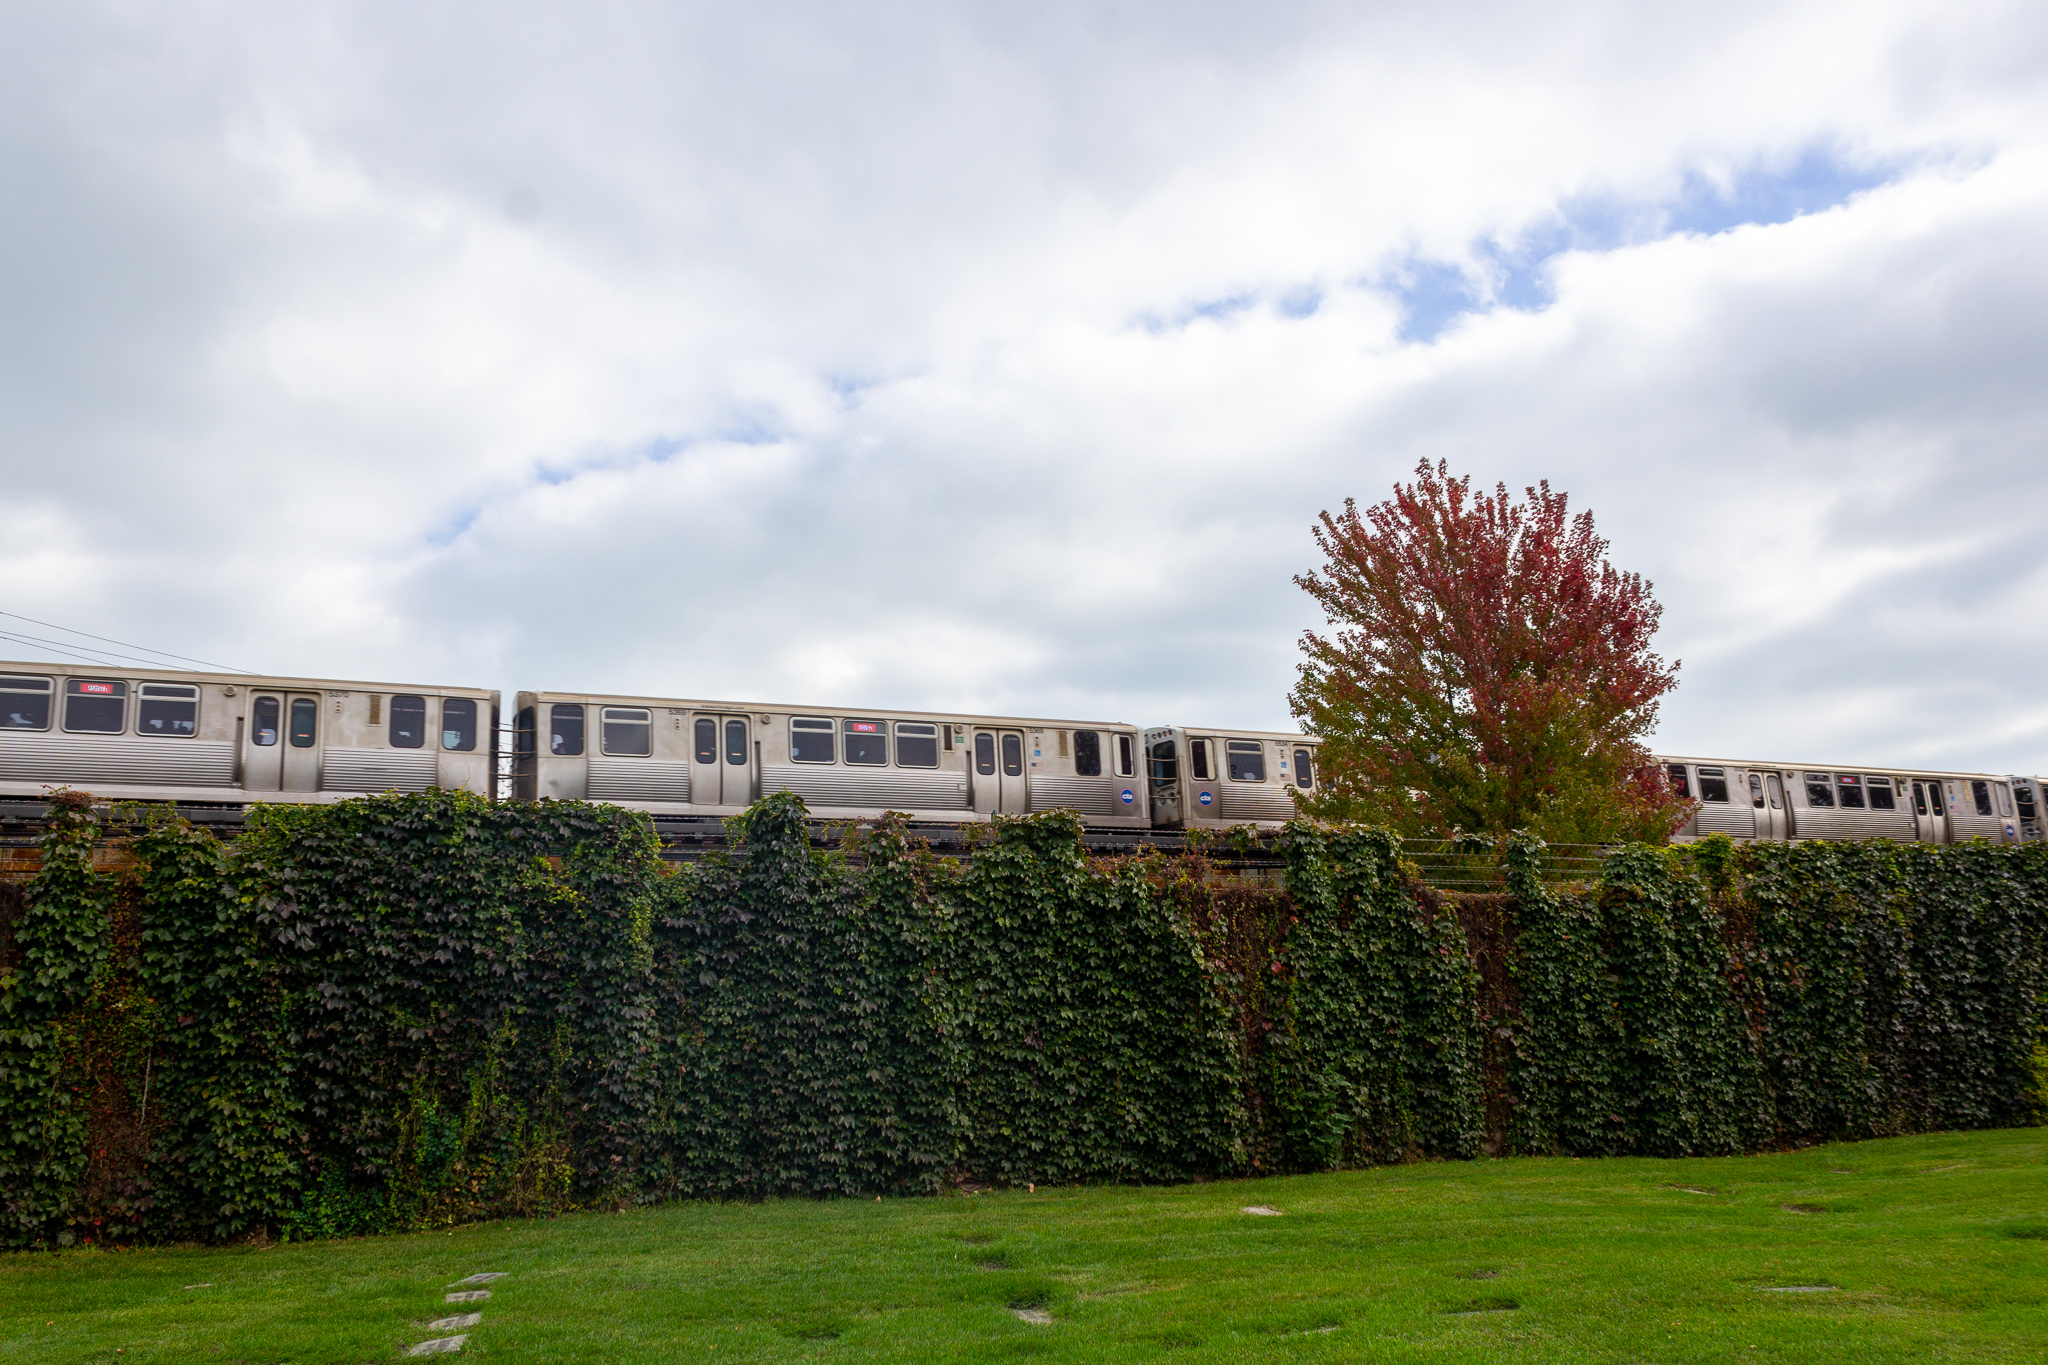 An elevated train over an ivy-covered wall, green cemetery grounds in the foreground and a clouded pale blue sky in the background